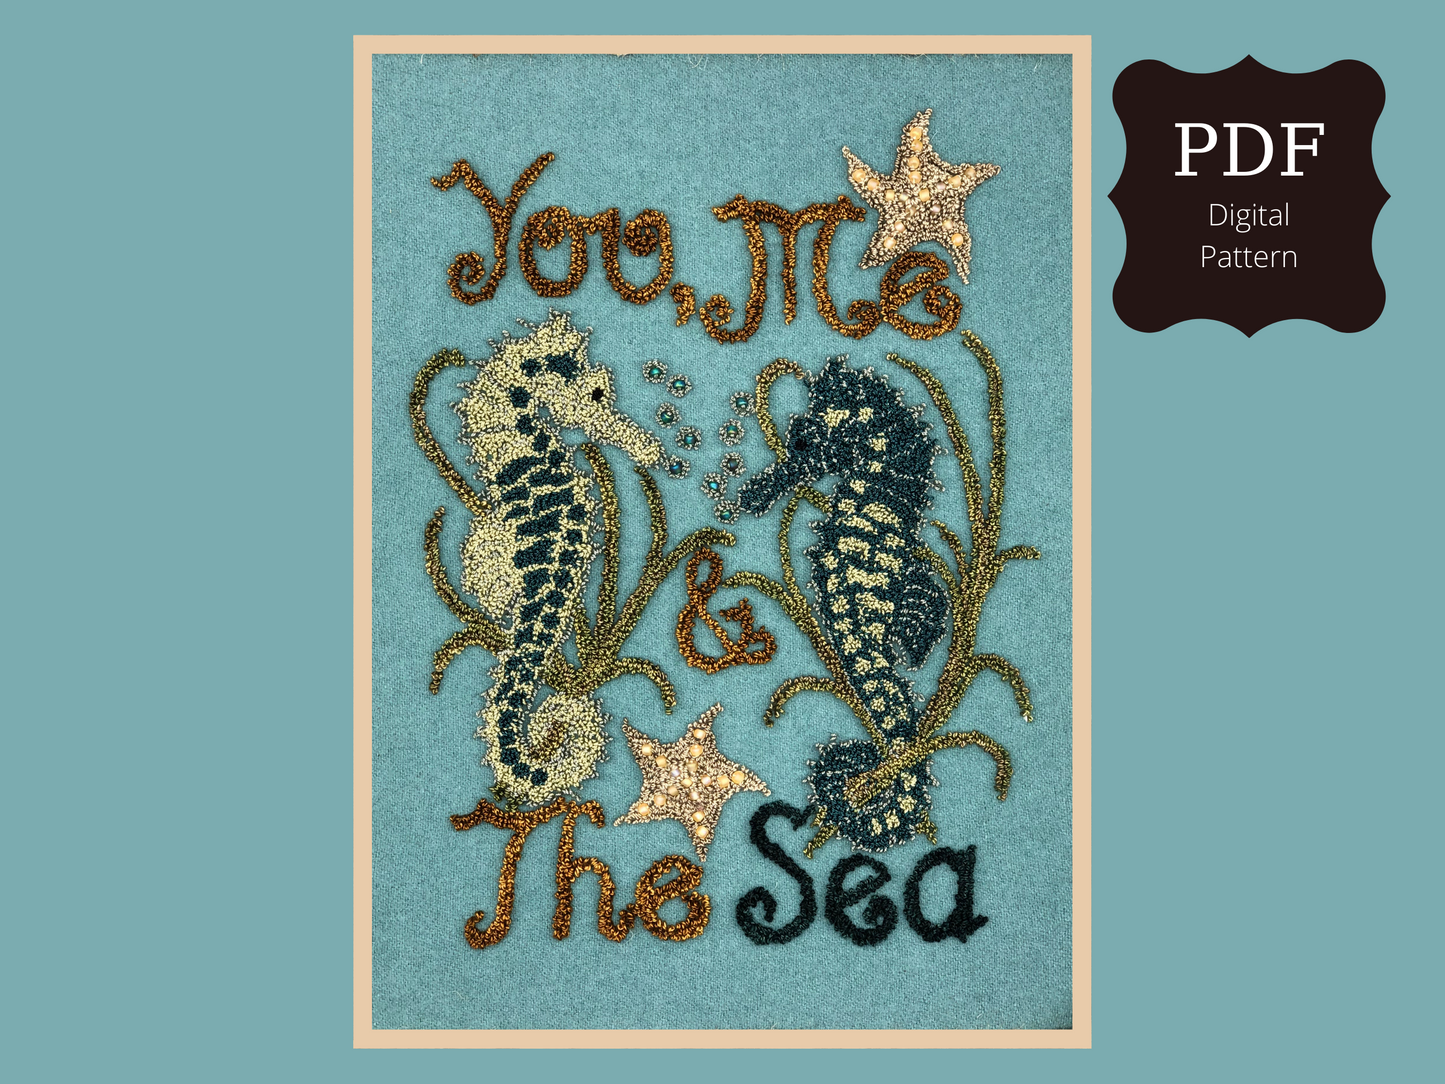 You, Me & The Sea- PDF Digital Download Punch Needle Pattern by Orphaned Wool. This wonderful under the sea pattern was created using wool fabric as the background fused with the weaver's cloth pattern. Small beads were also used to create the bubble effects. 